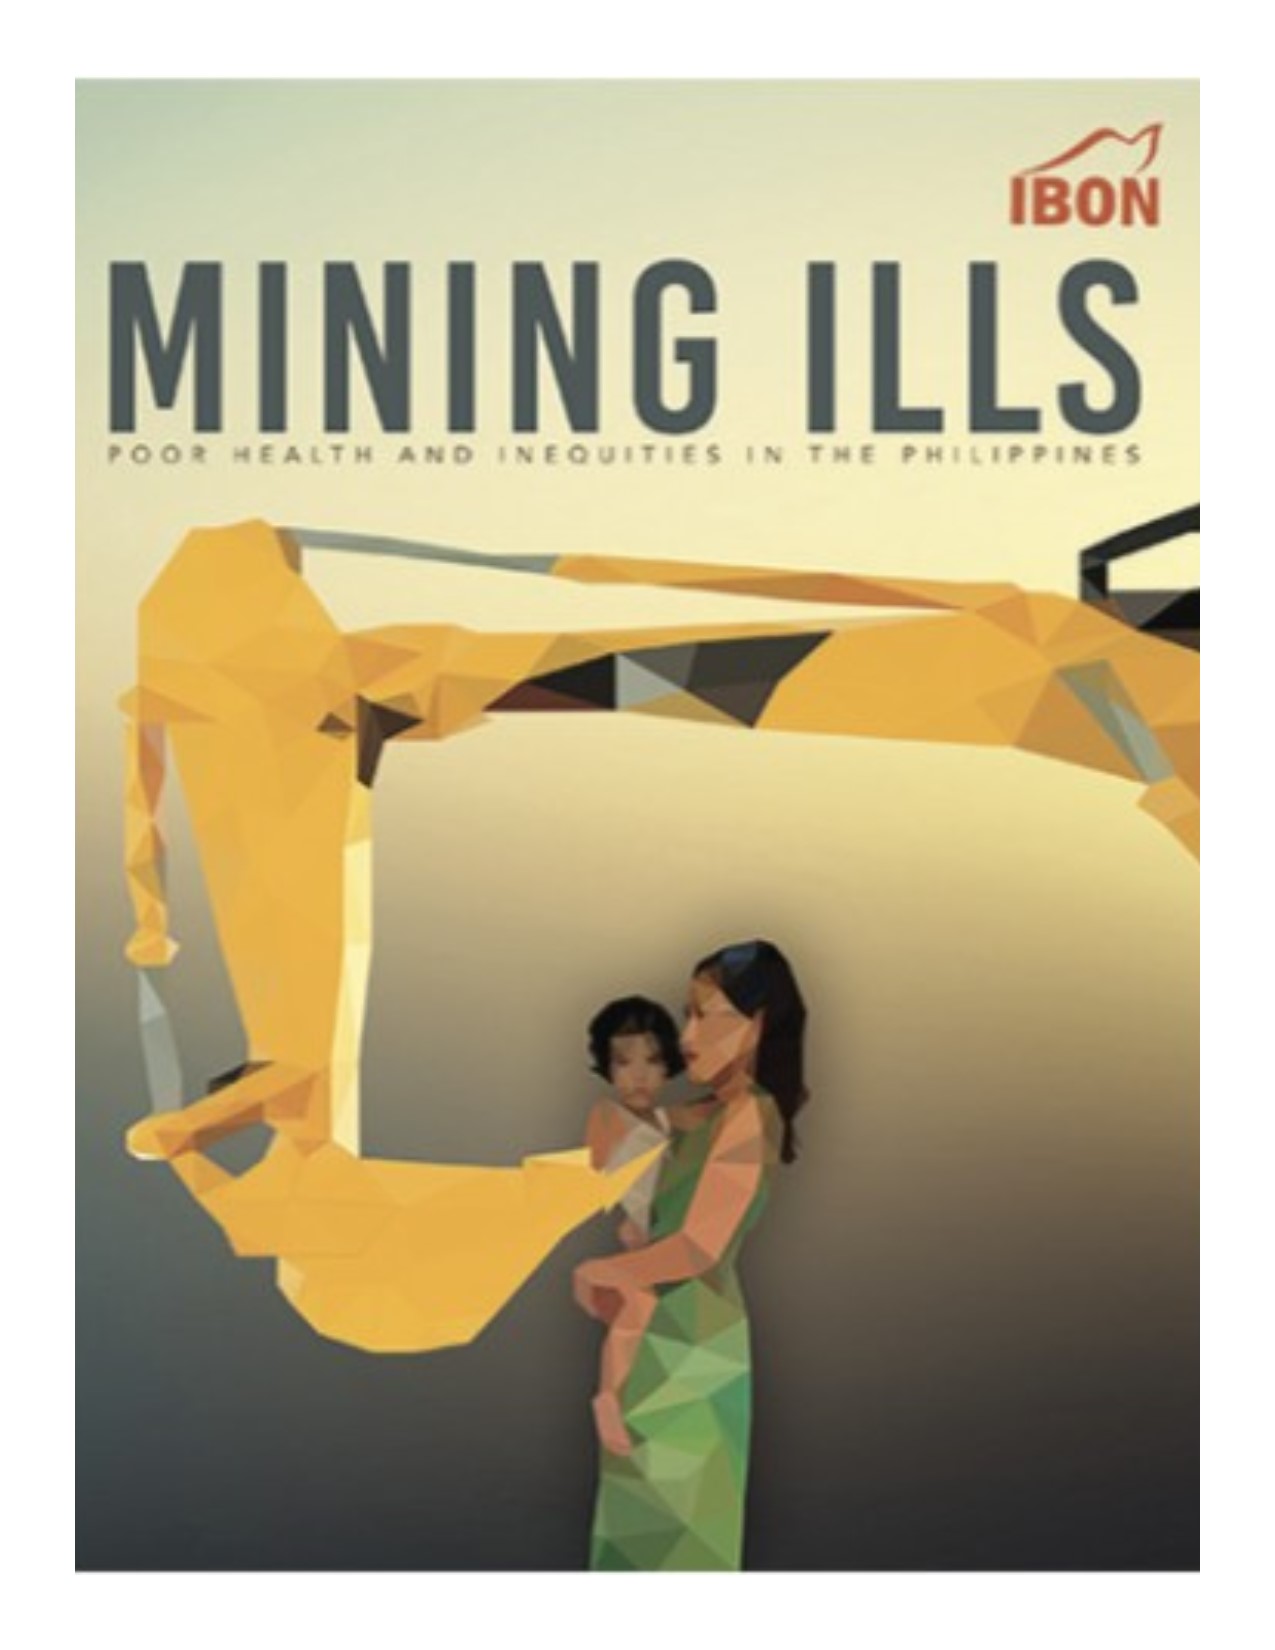 Mining ills poor health and inequities in the Philippines.